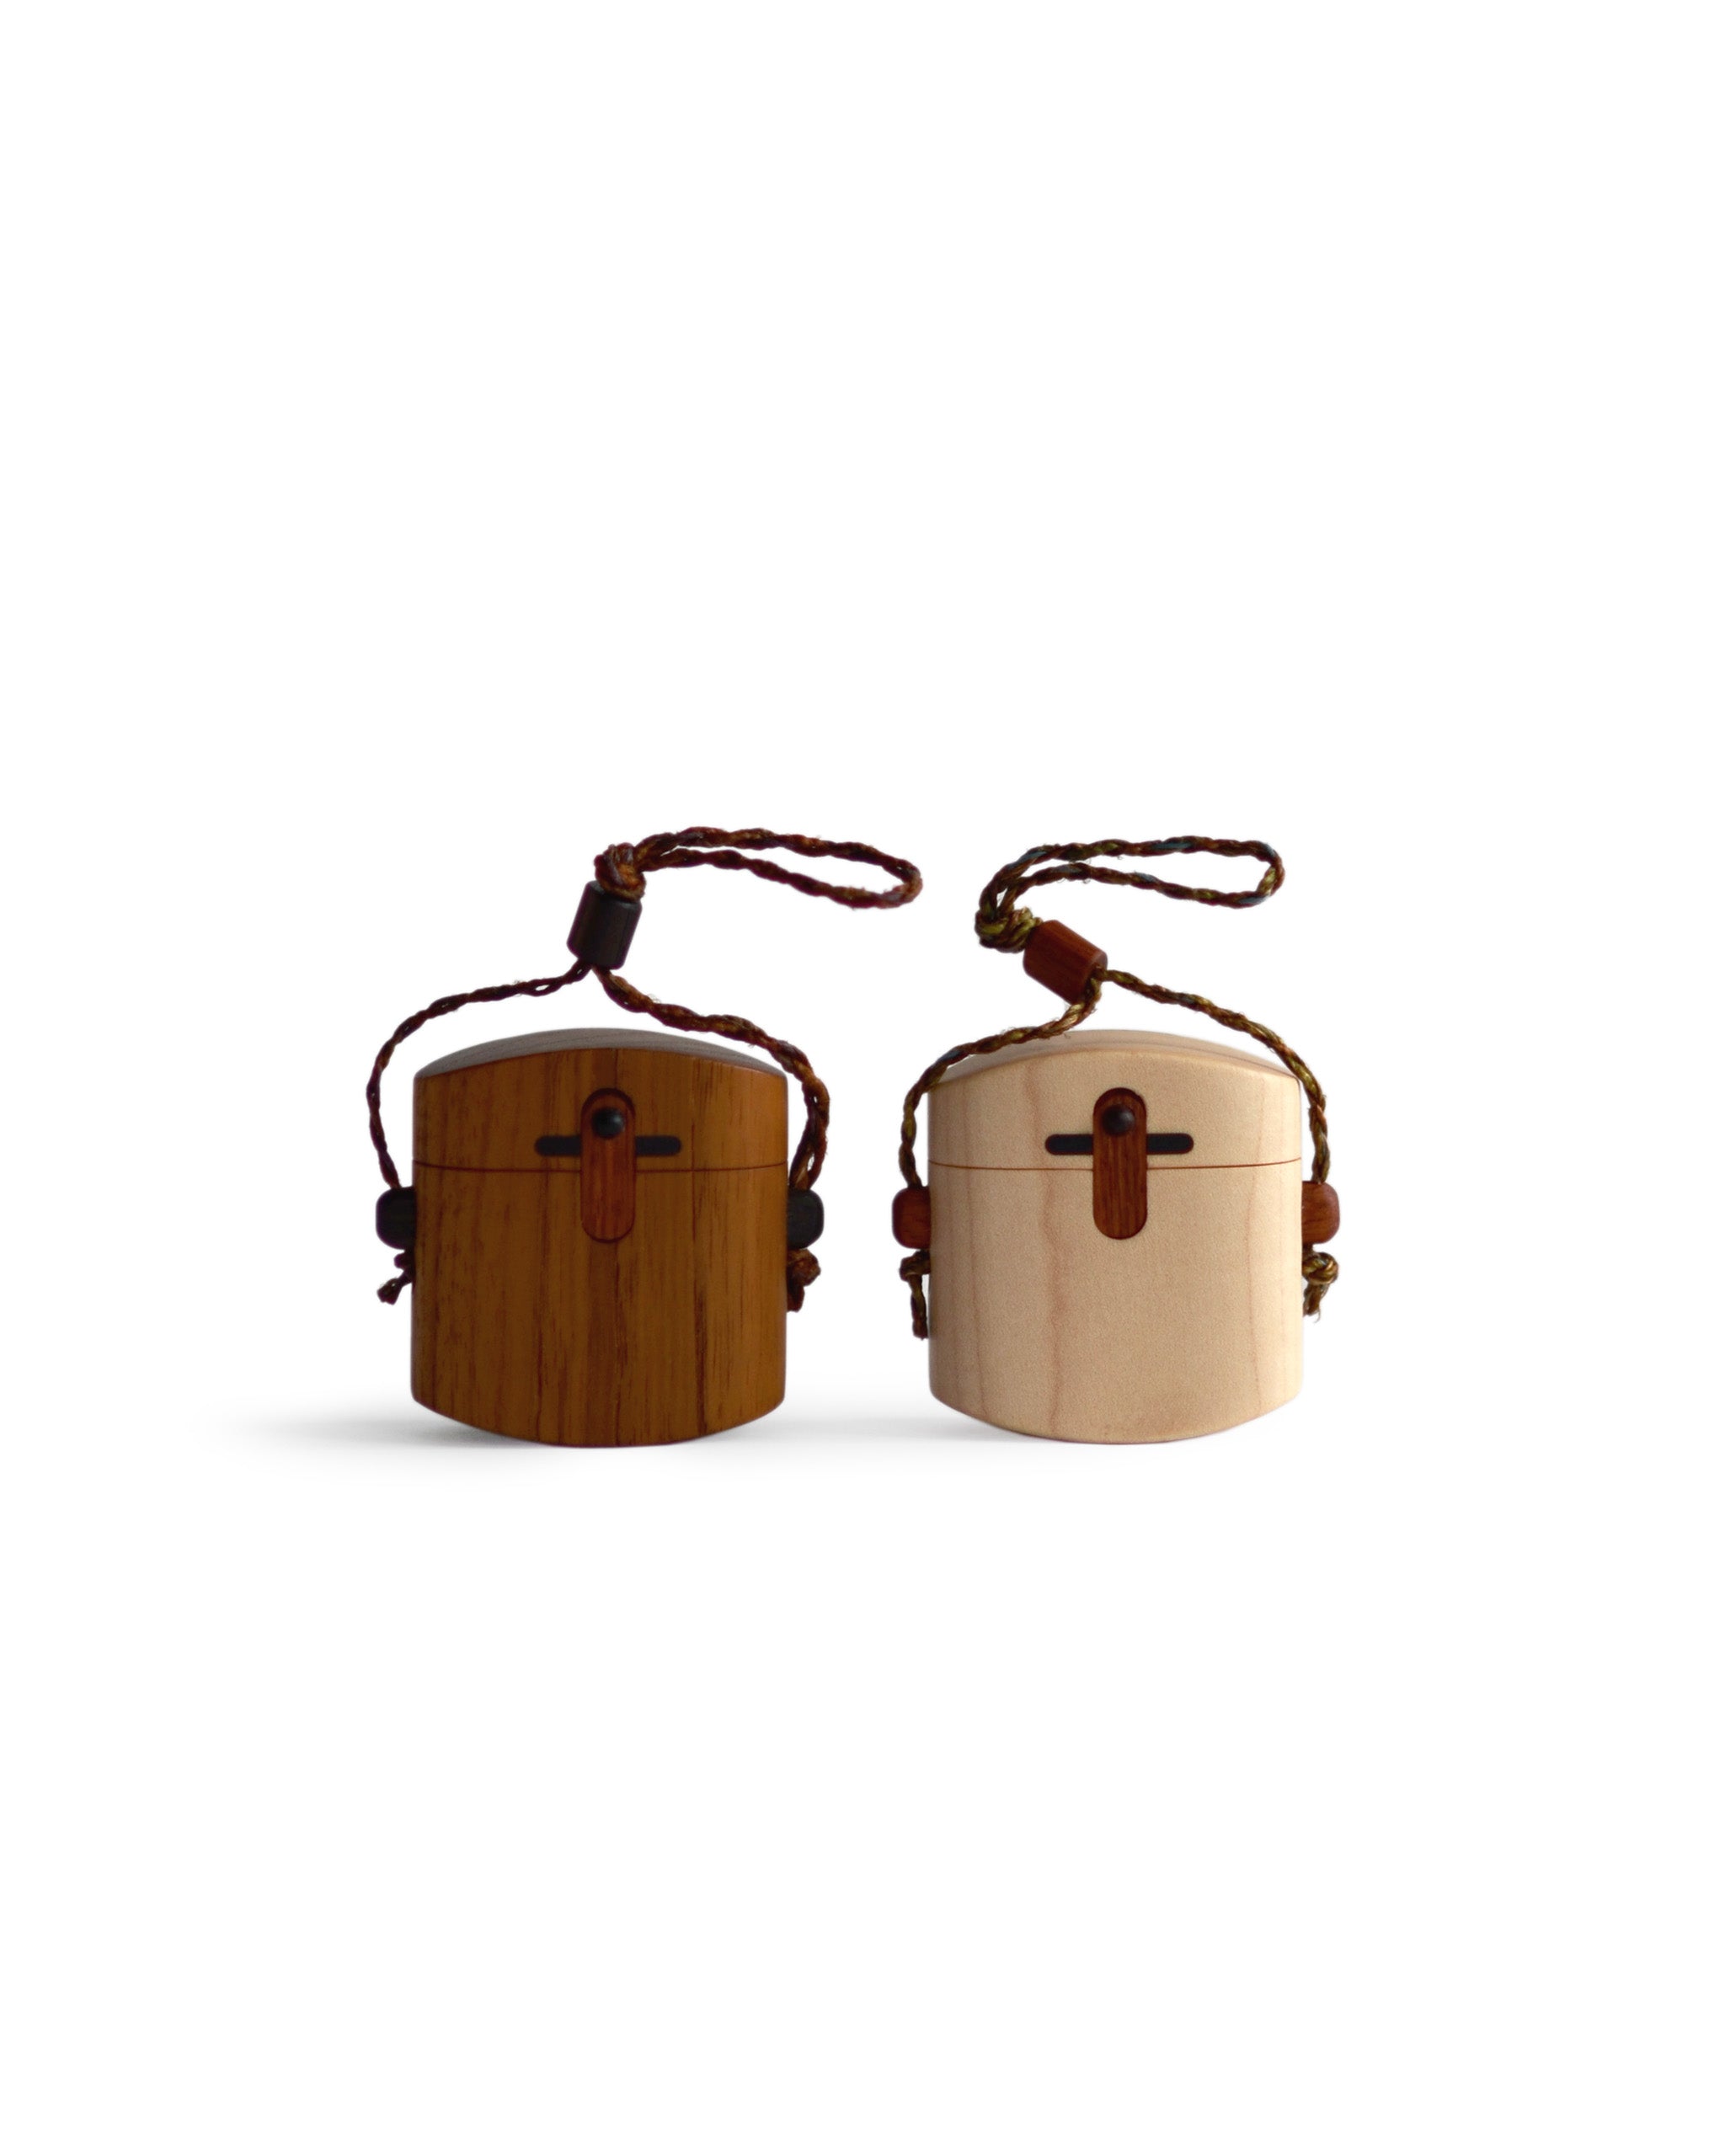 Silhouetted image of maple and walnut pill cases with cord by Norio Tanno against white background.